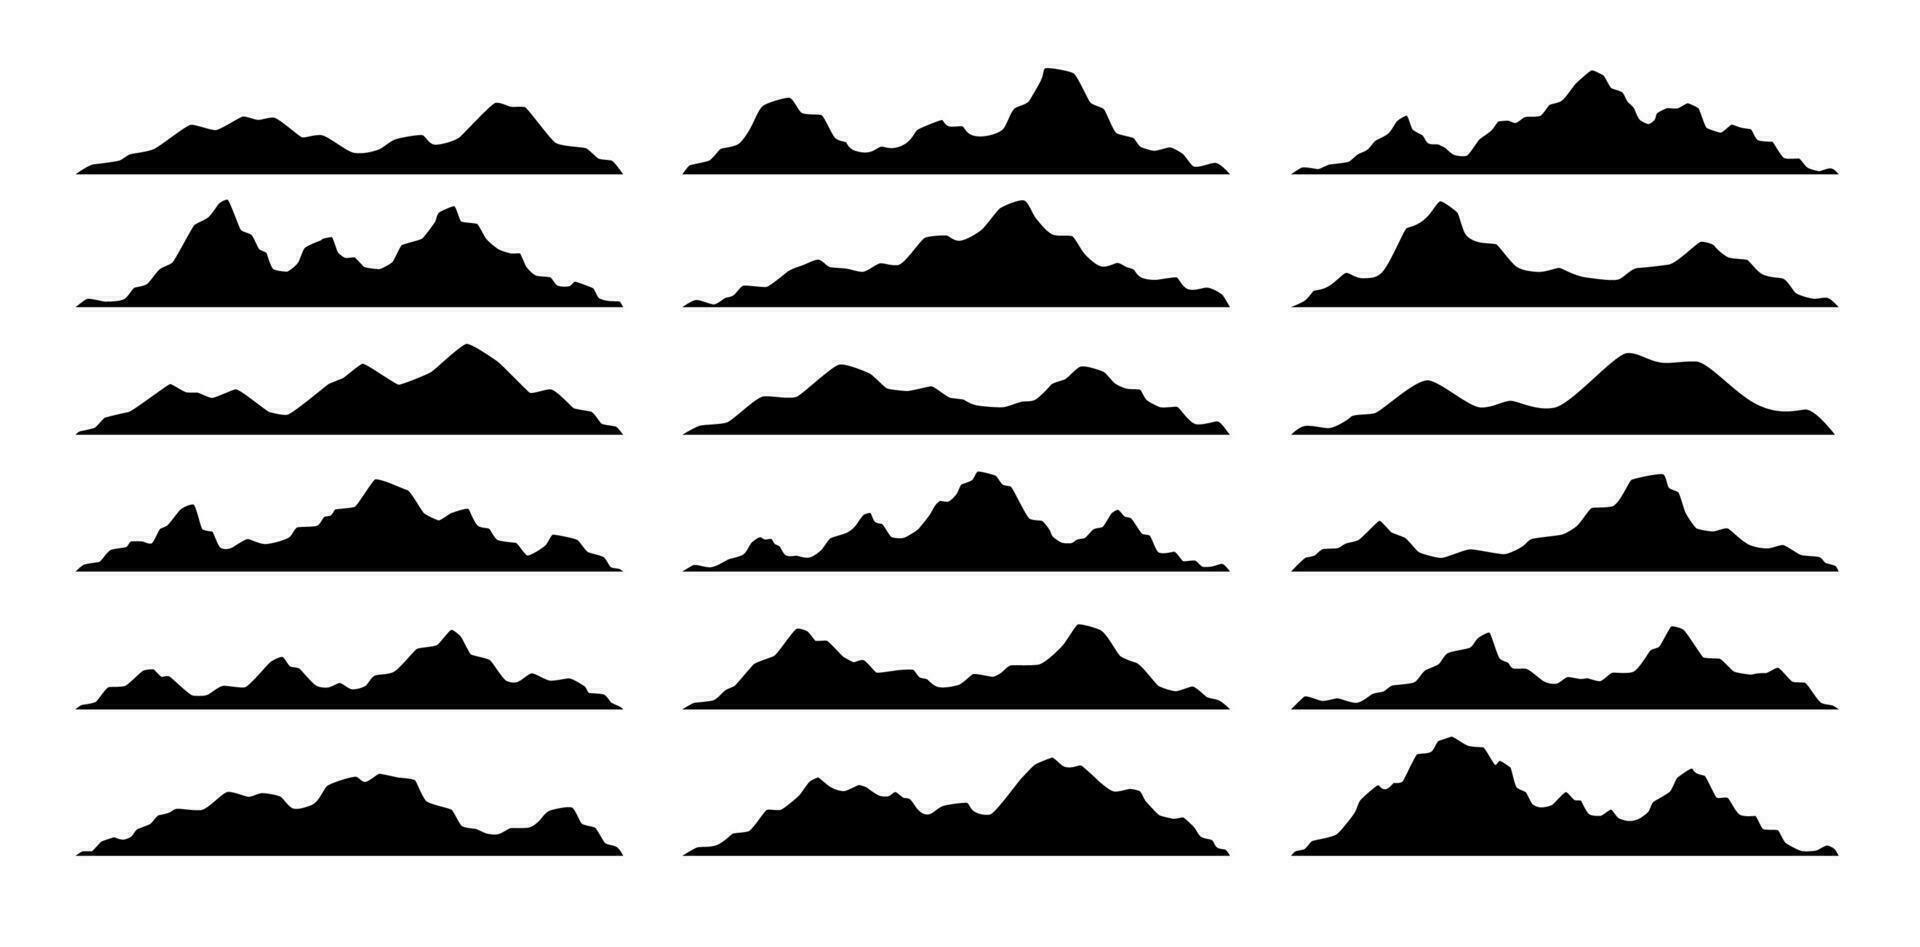 Black mountain, hill and rock silhouettes set vector